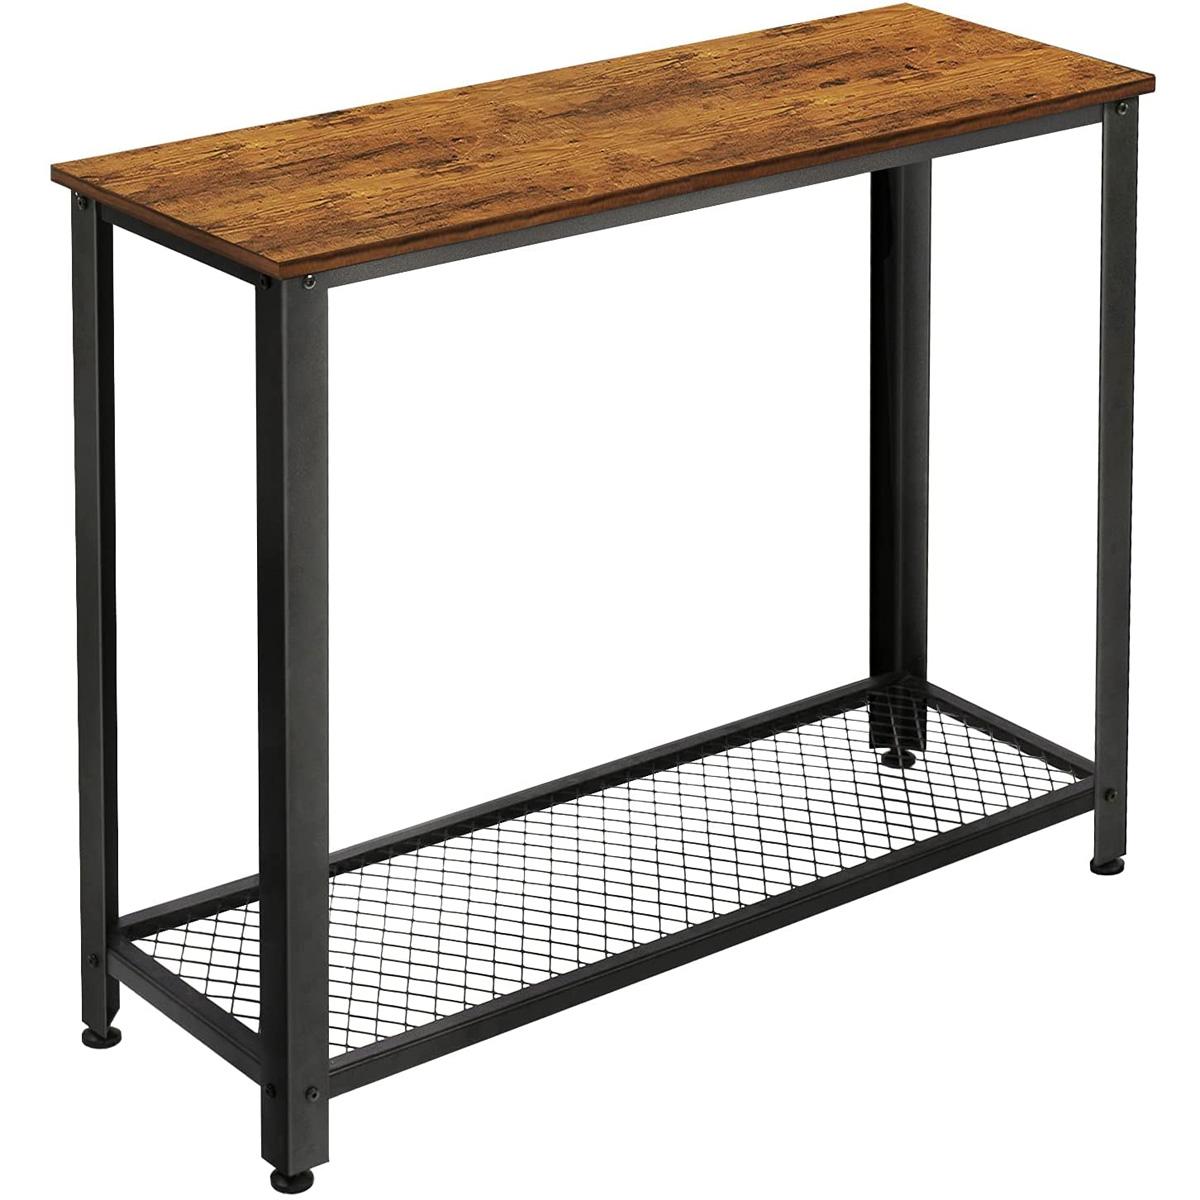 KingSo Console Table for $44.09 Shipped